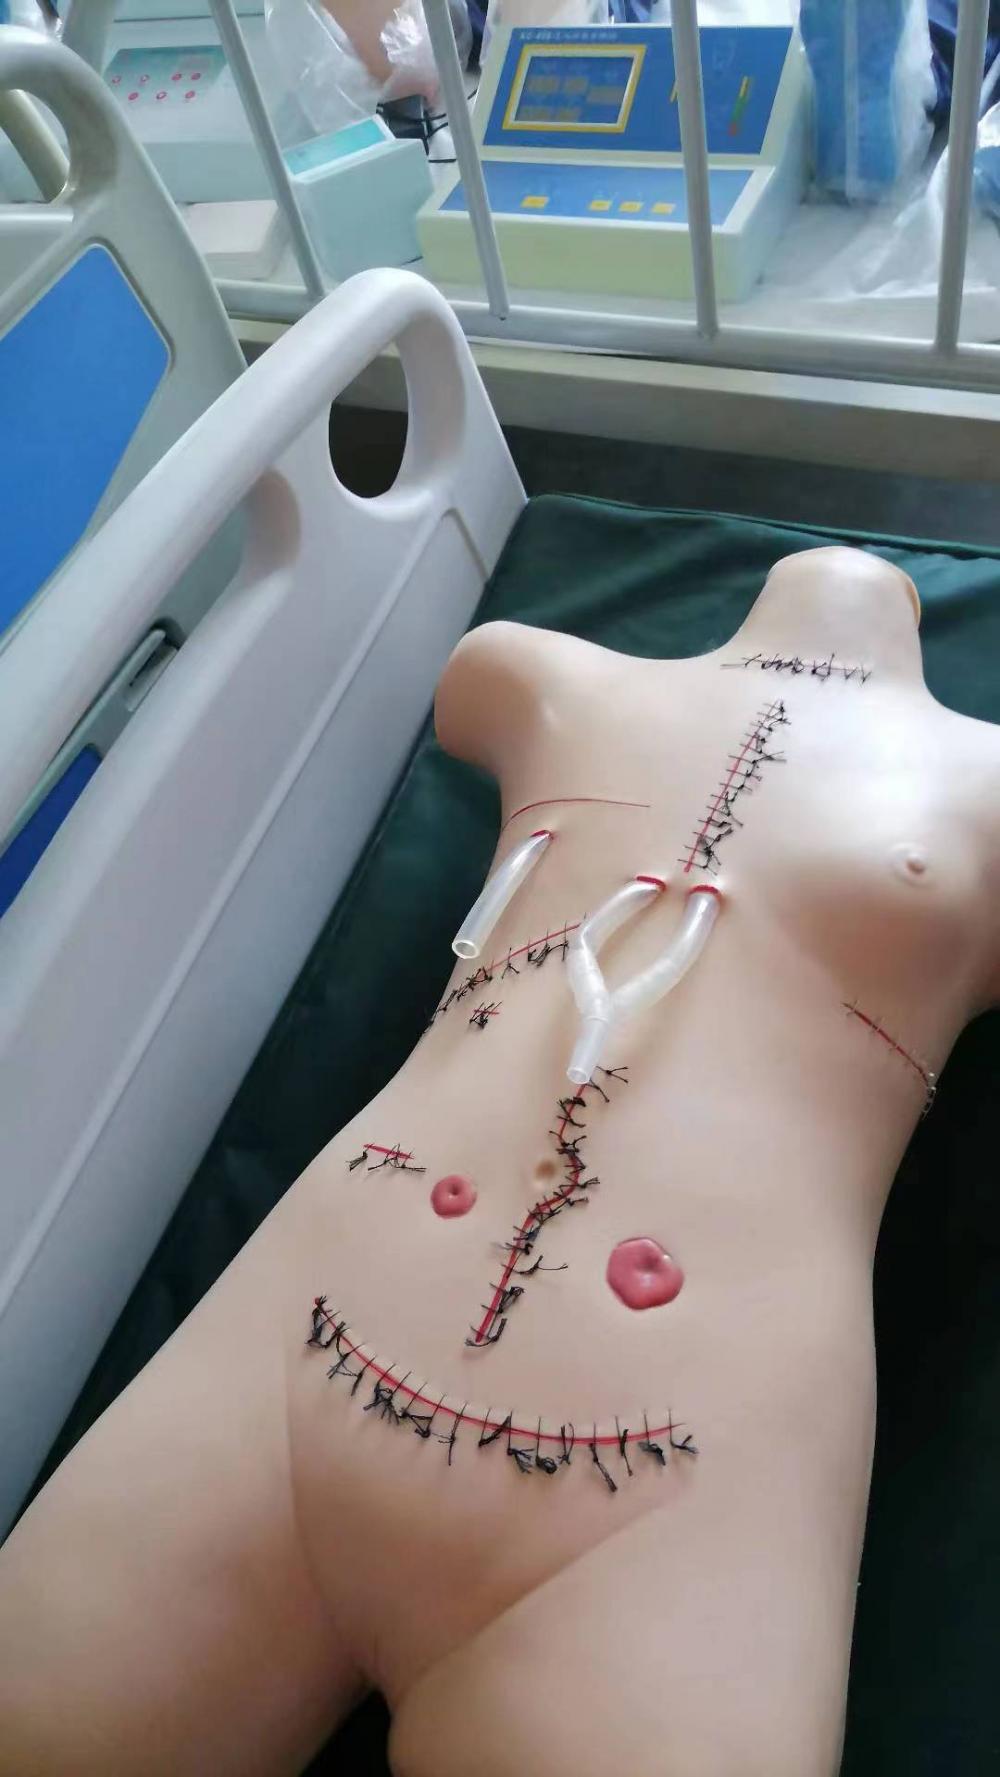 Surgical Suturing and Bandaging Model